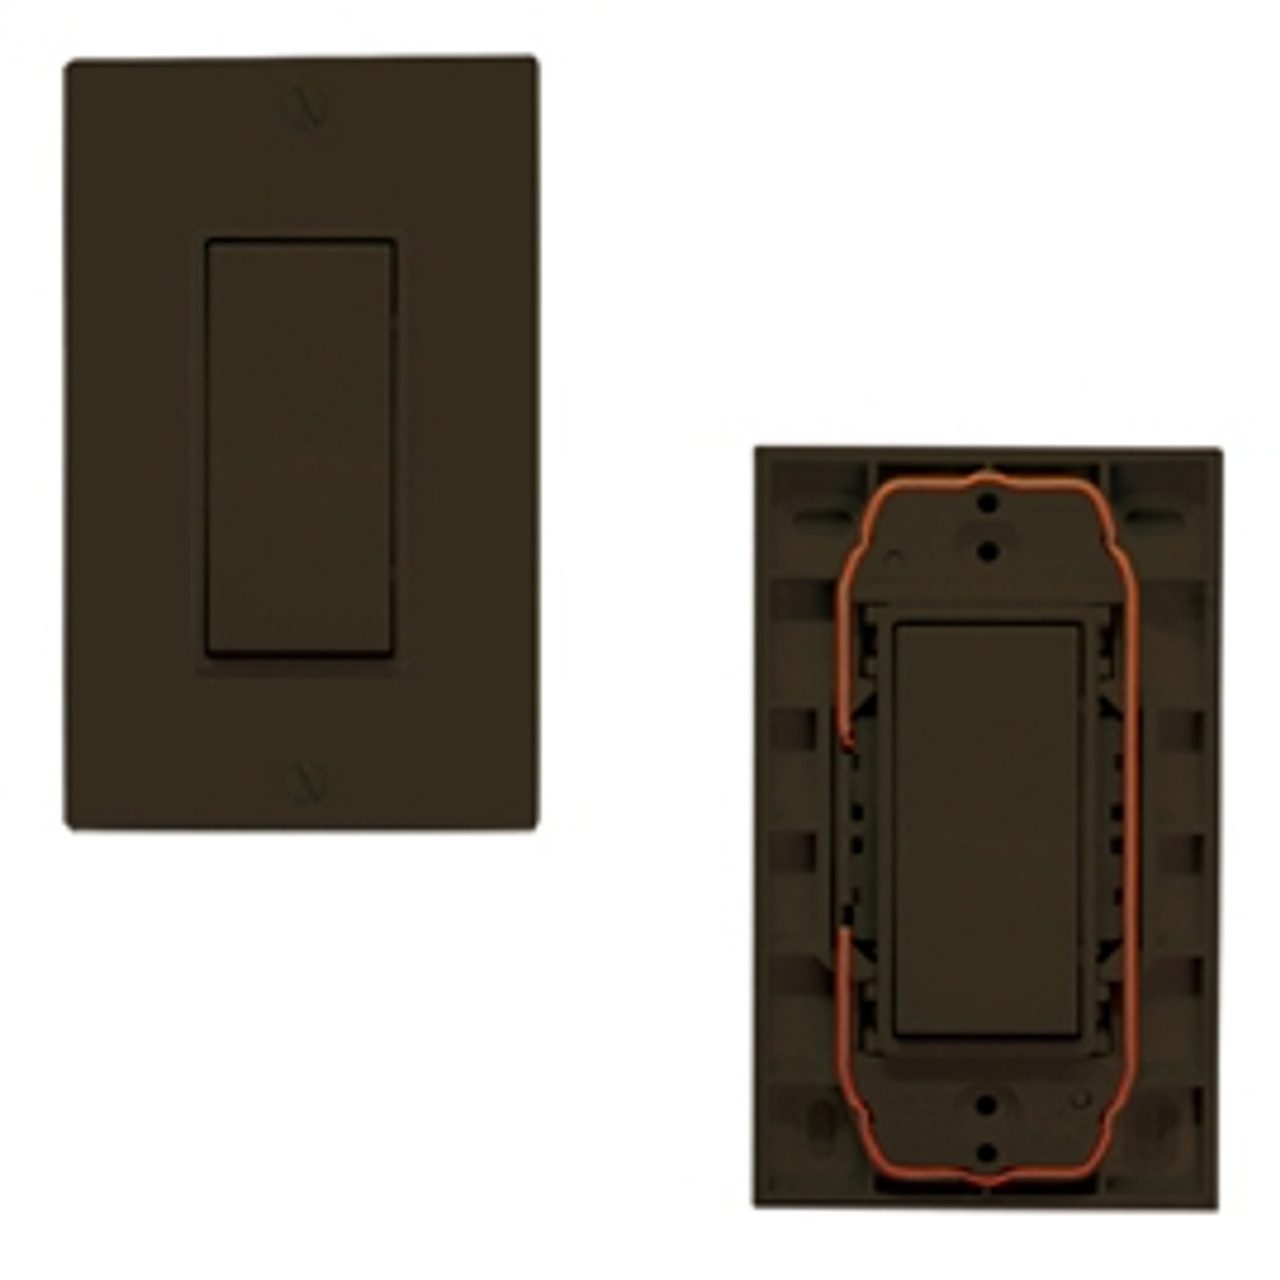 FUNCTIONAL DEVICES FUNWST-EN-BR Wireless Wall SwitchTransmitter, Brown